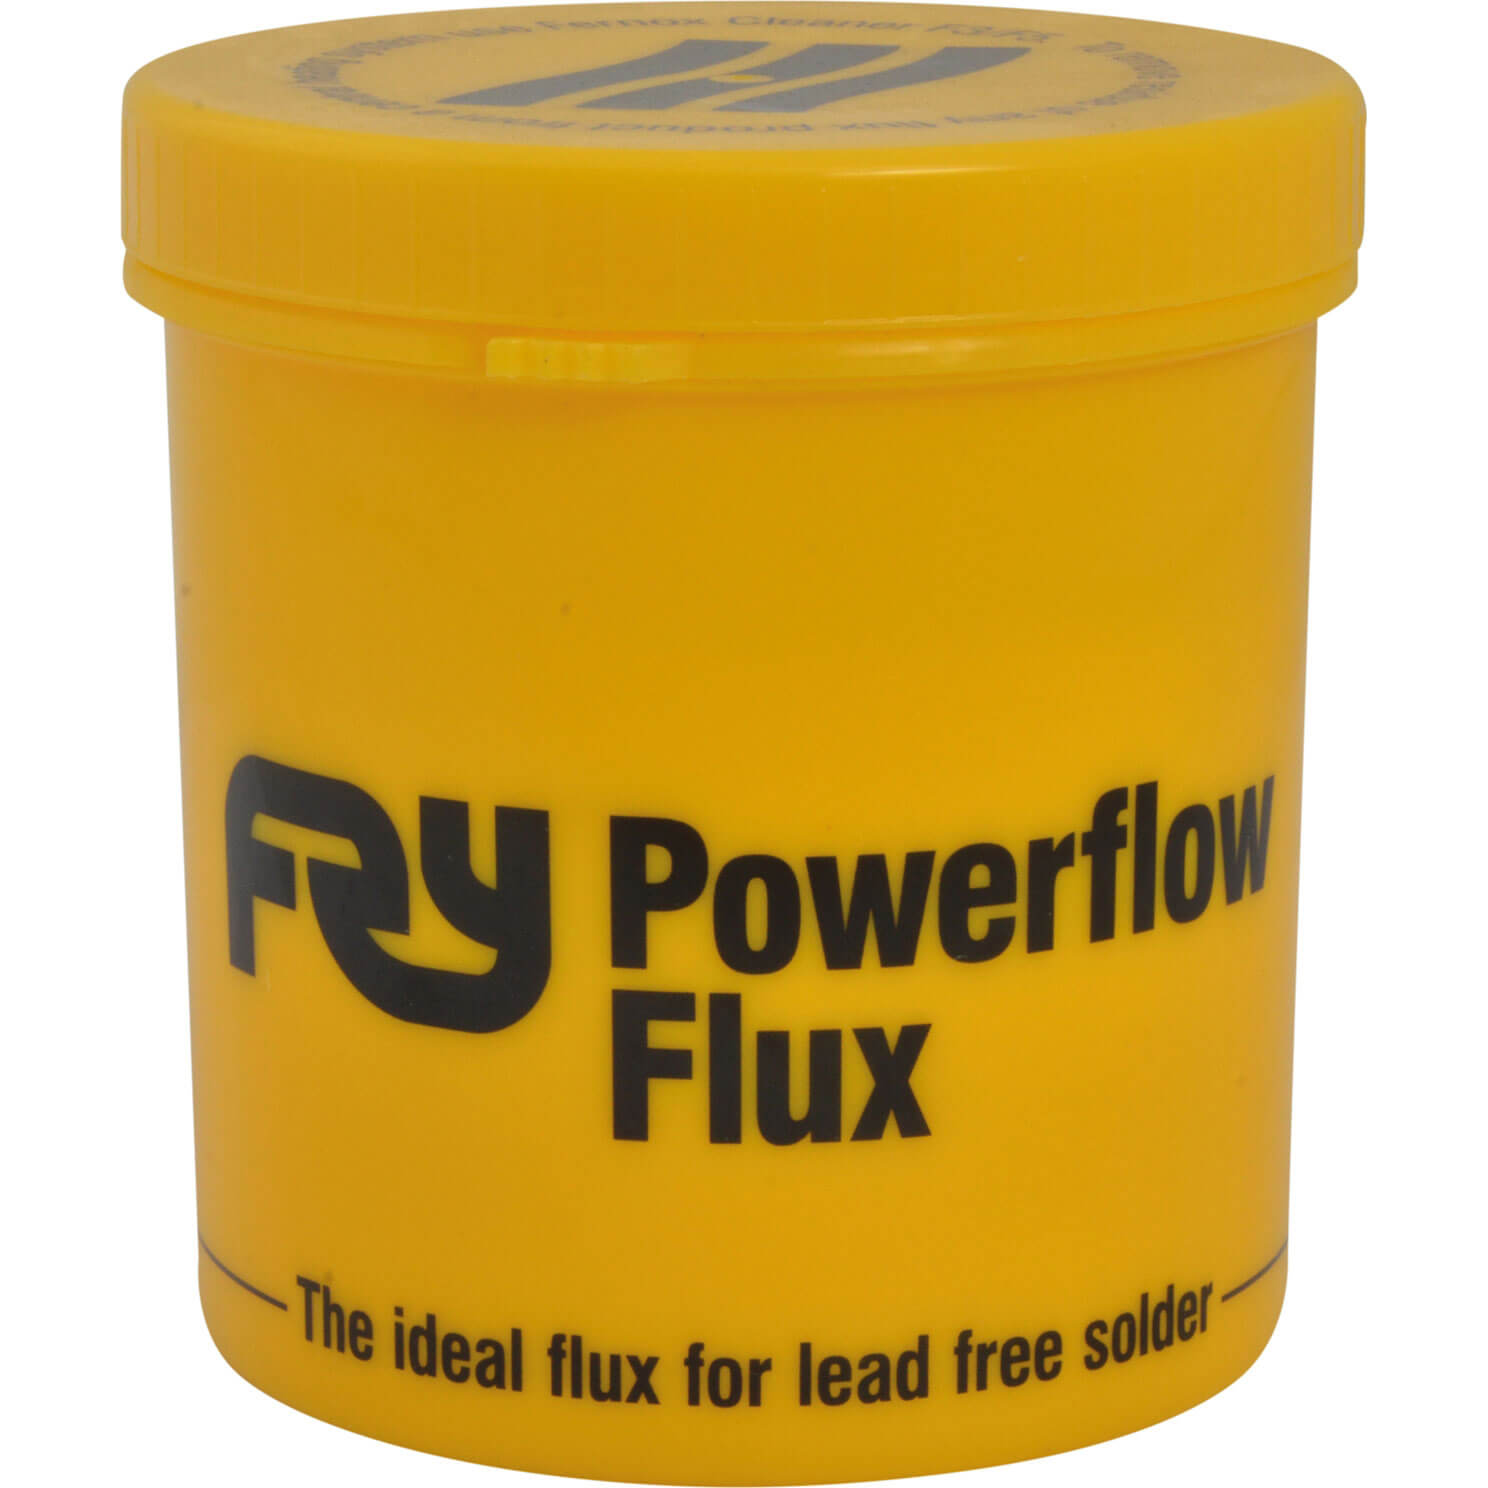 Photos - Equipment Accessory Frys Powerflow Flux 350g FRYPFLARGE